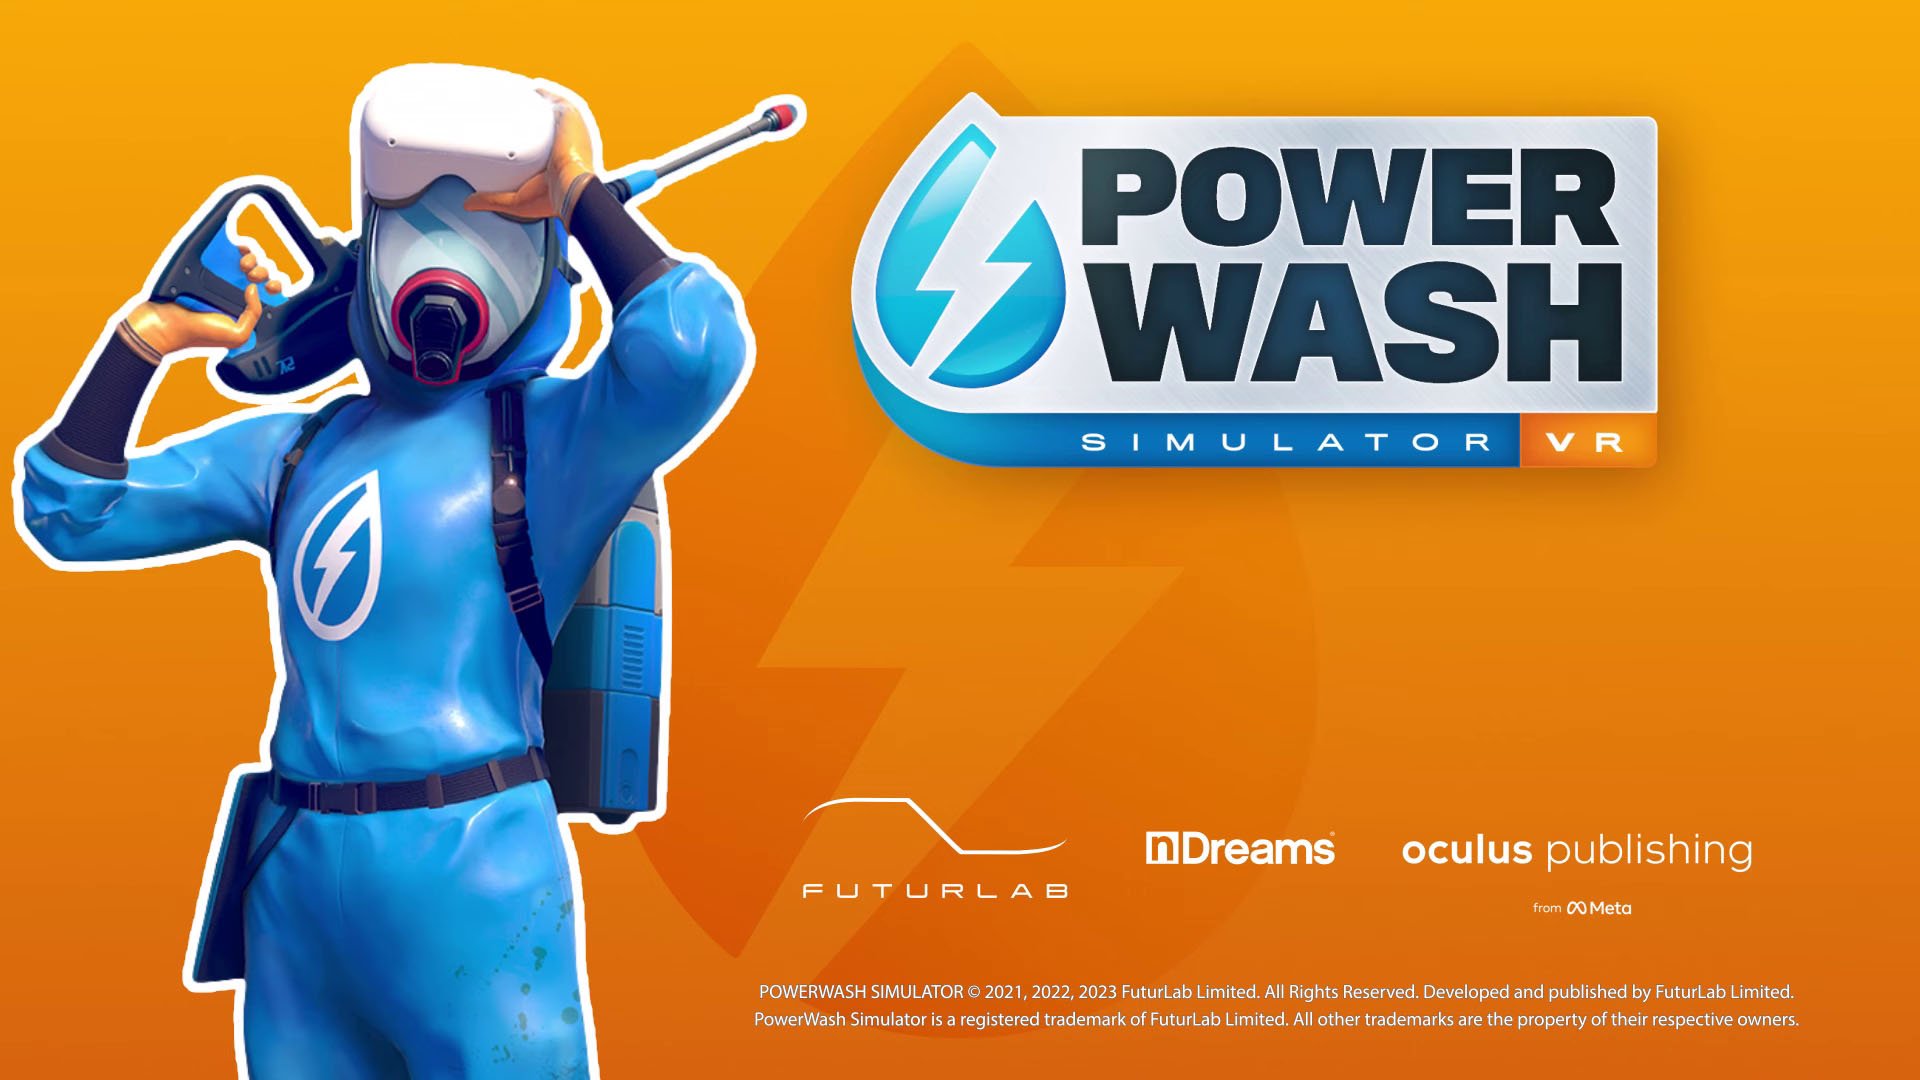 Power Wash Simulator March 2 Update Adds New Content and Changes on PC